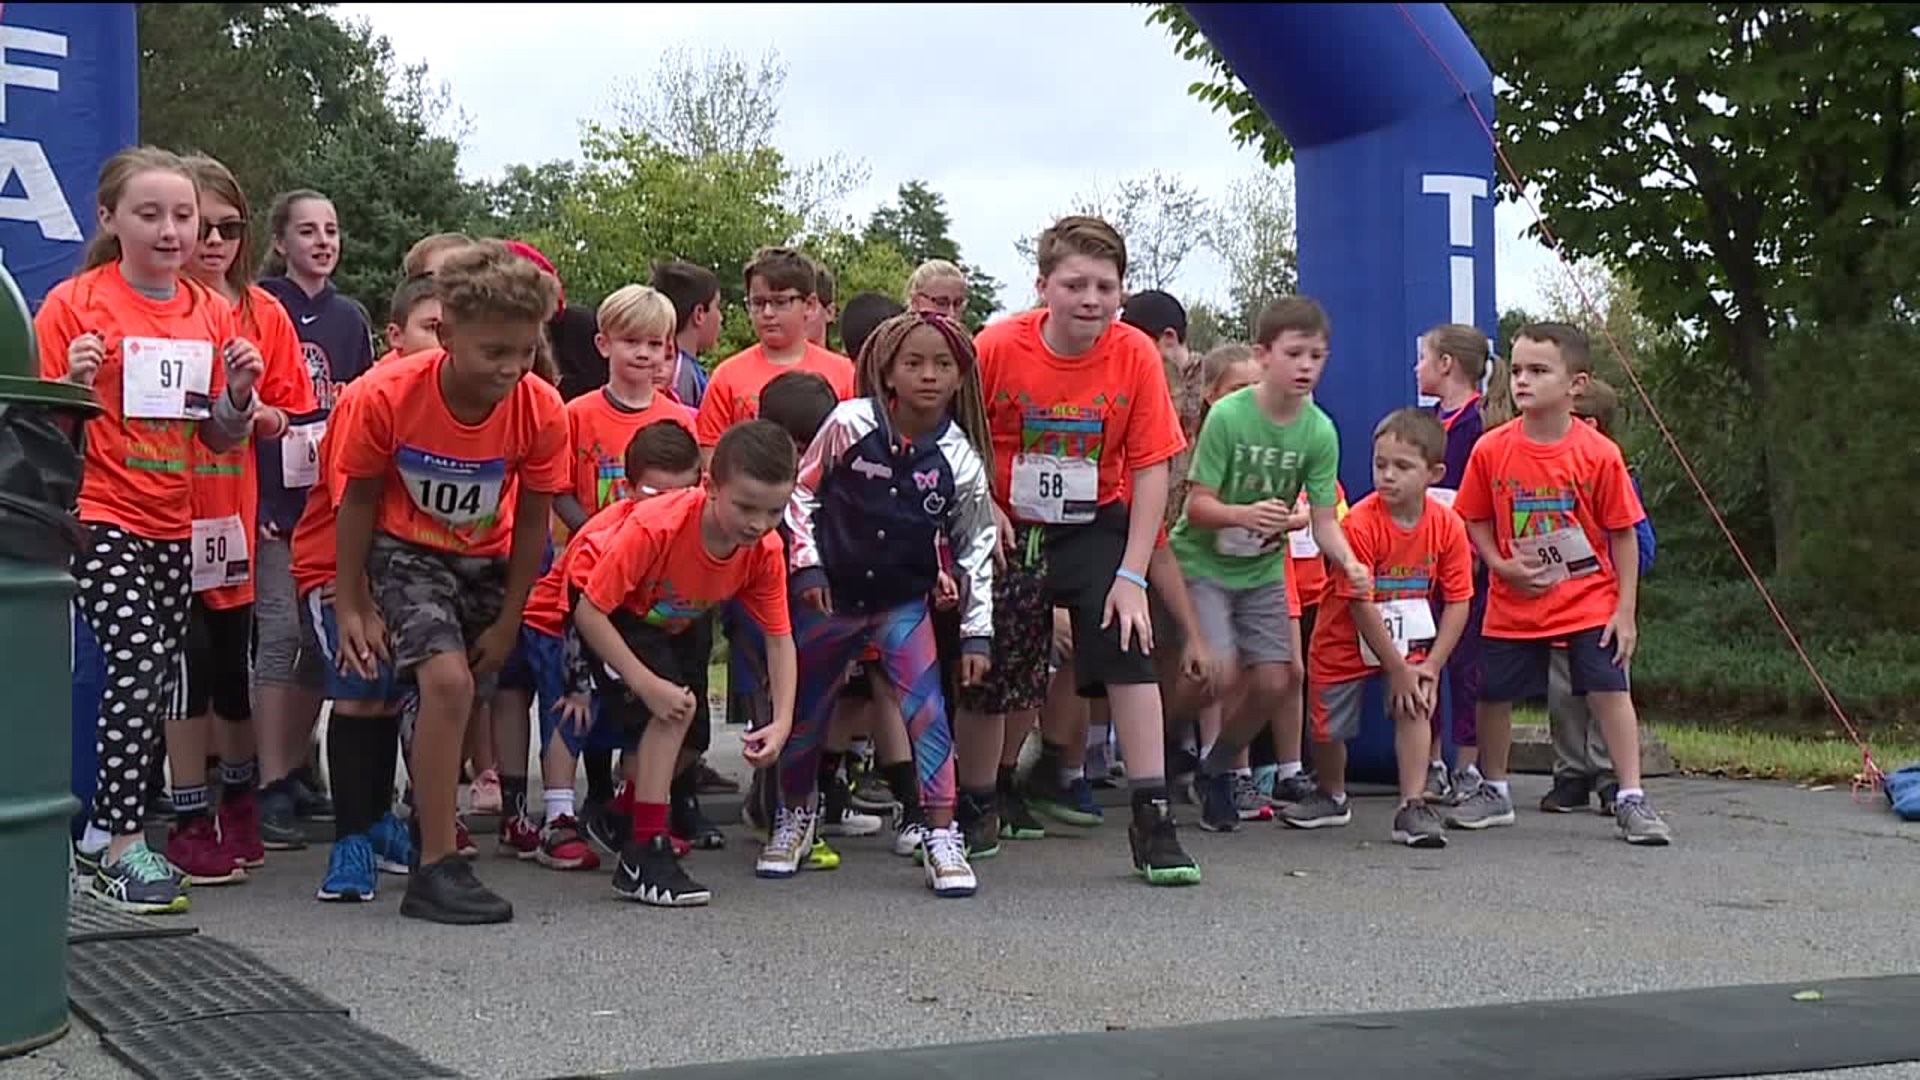 Annual 5K Held in Memory of Boy Killed by Drunk Driver